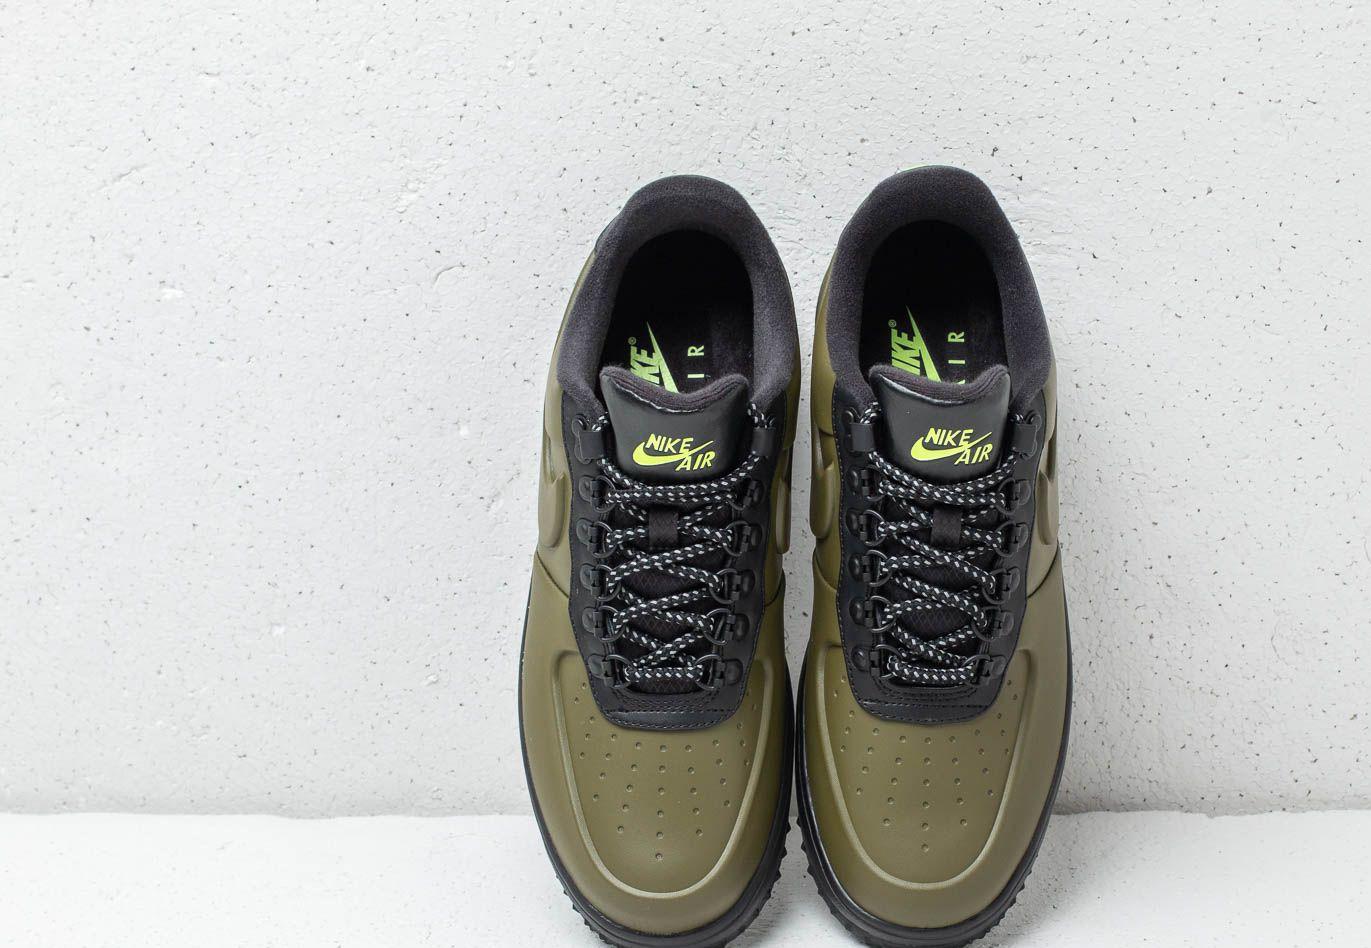 nike lunar force 1 duckboot low olive canvas